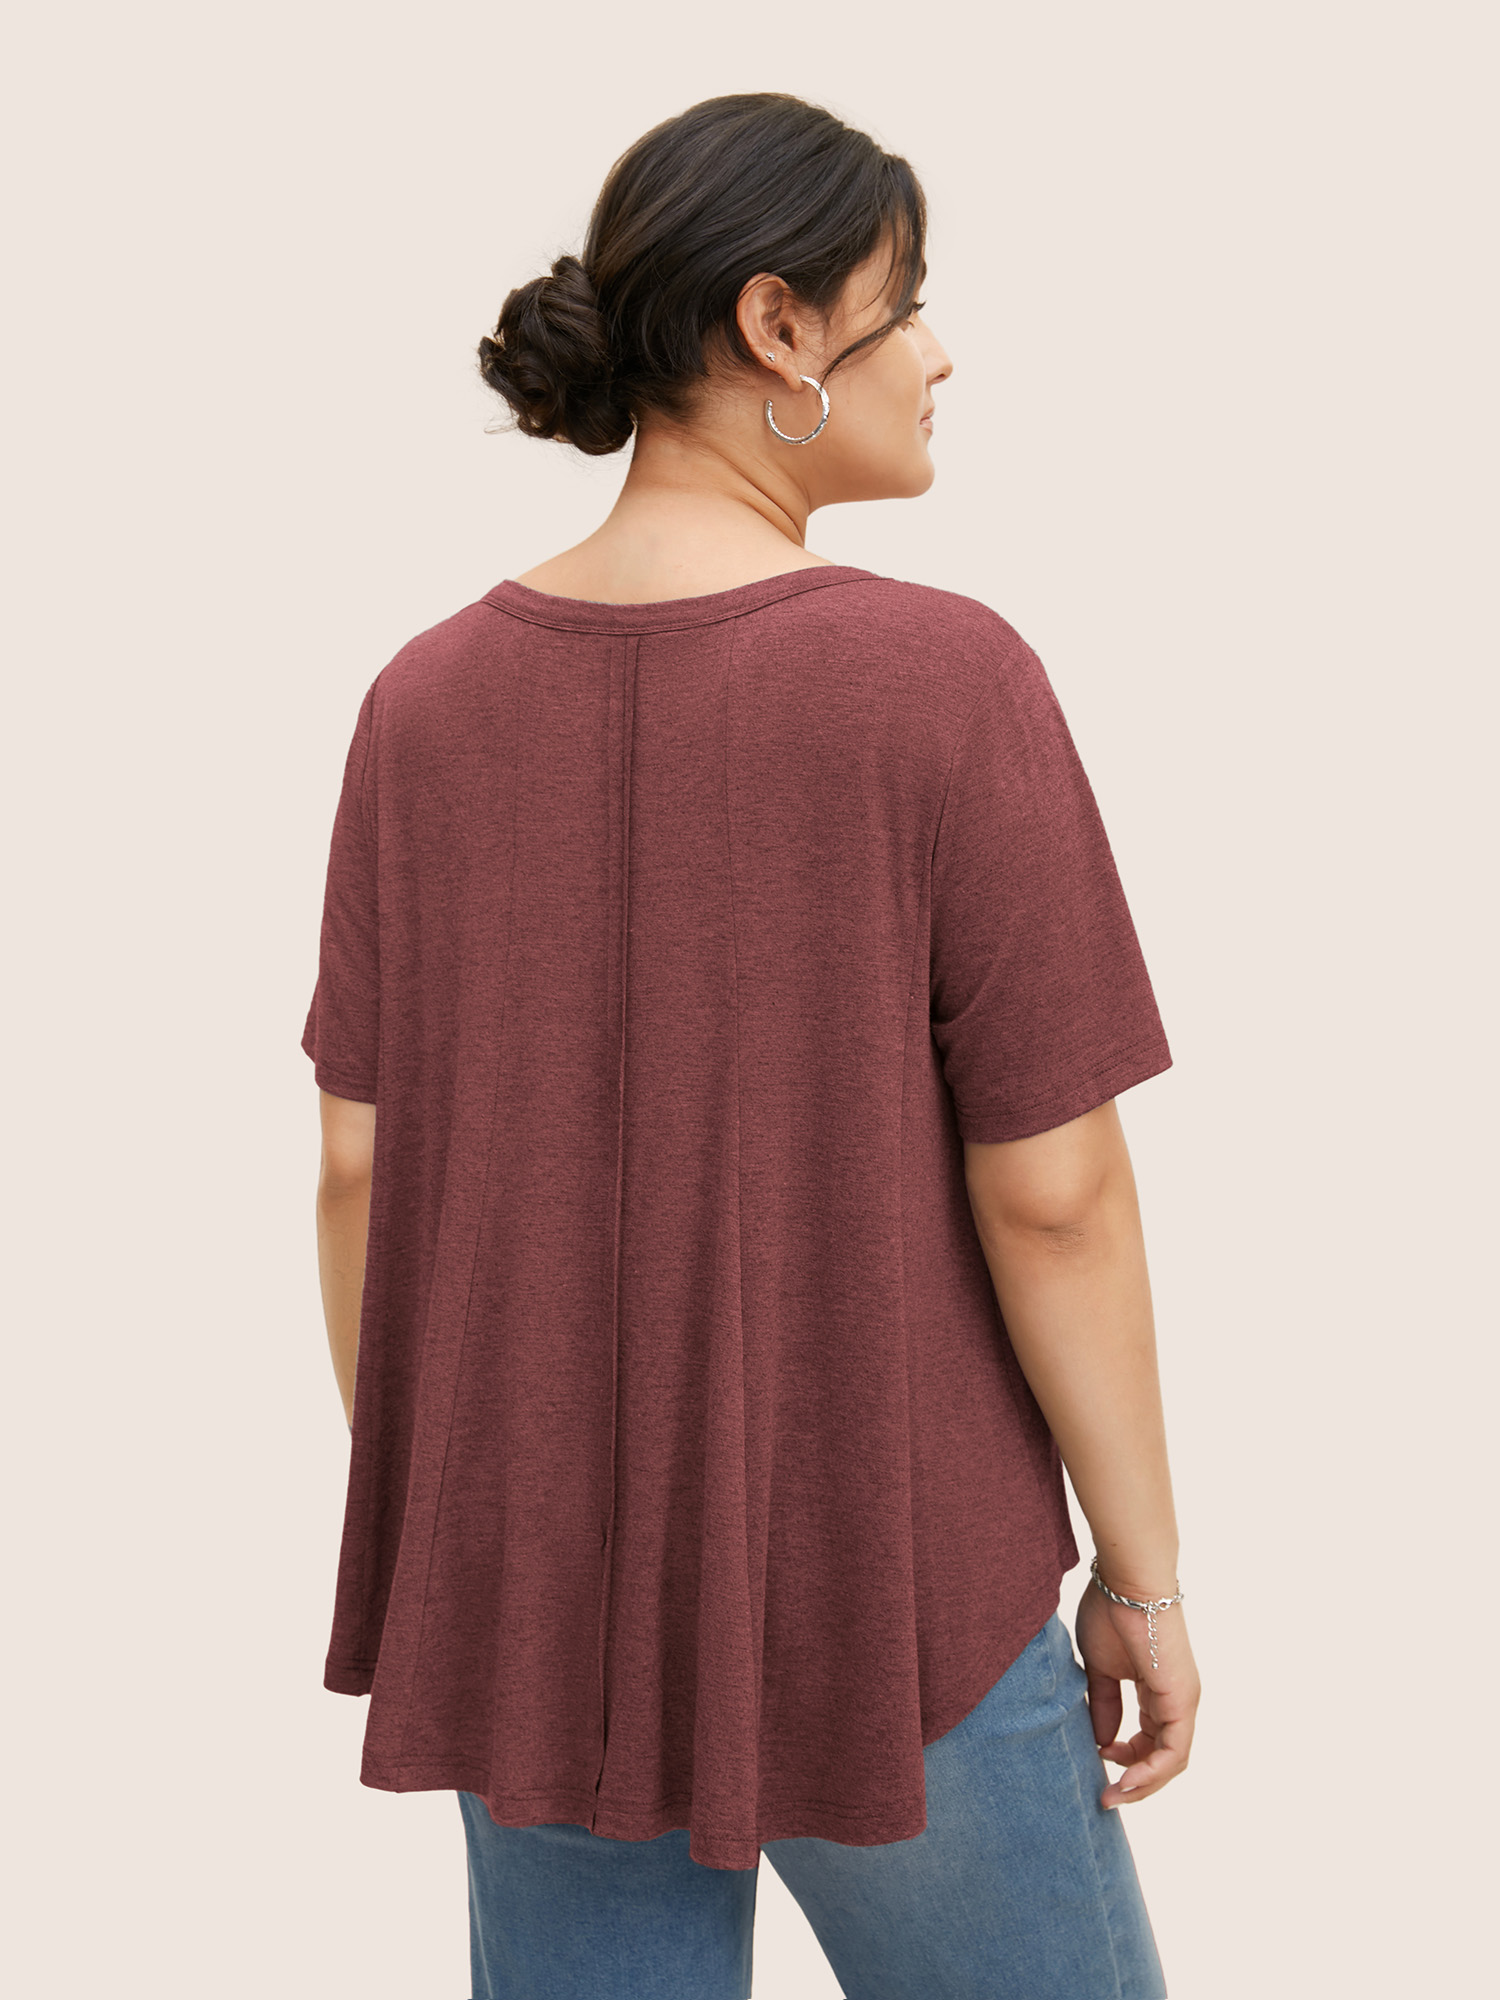 

Plus Size Solid Heather V Neck Curved Hem T-shirt Russet Women Casual Patchwork V-neck Everyday T-shirts BloomChic